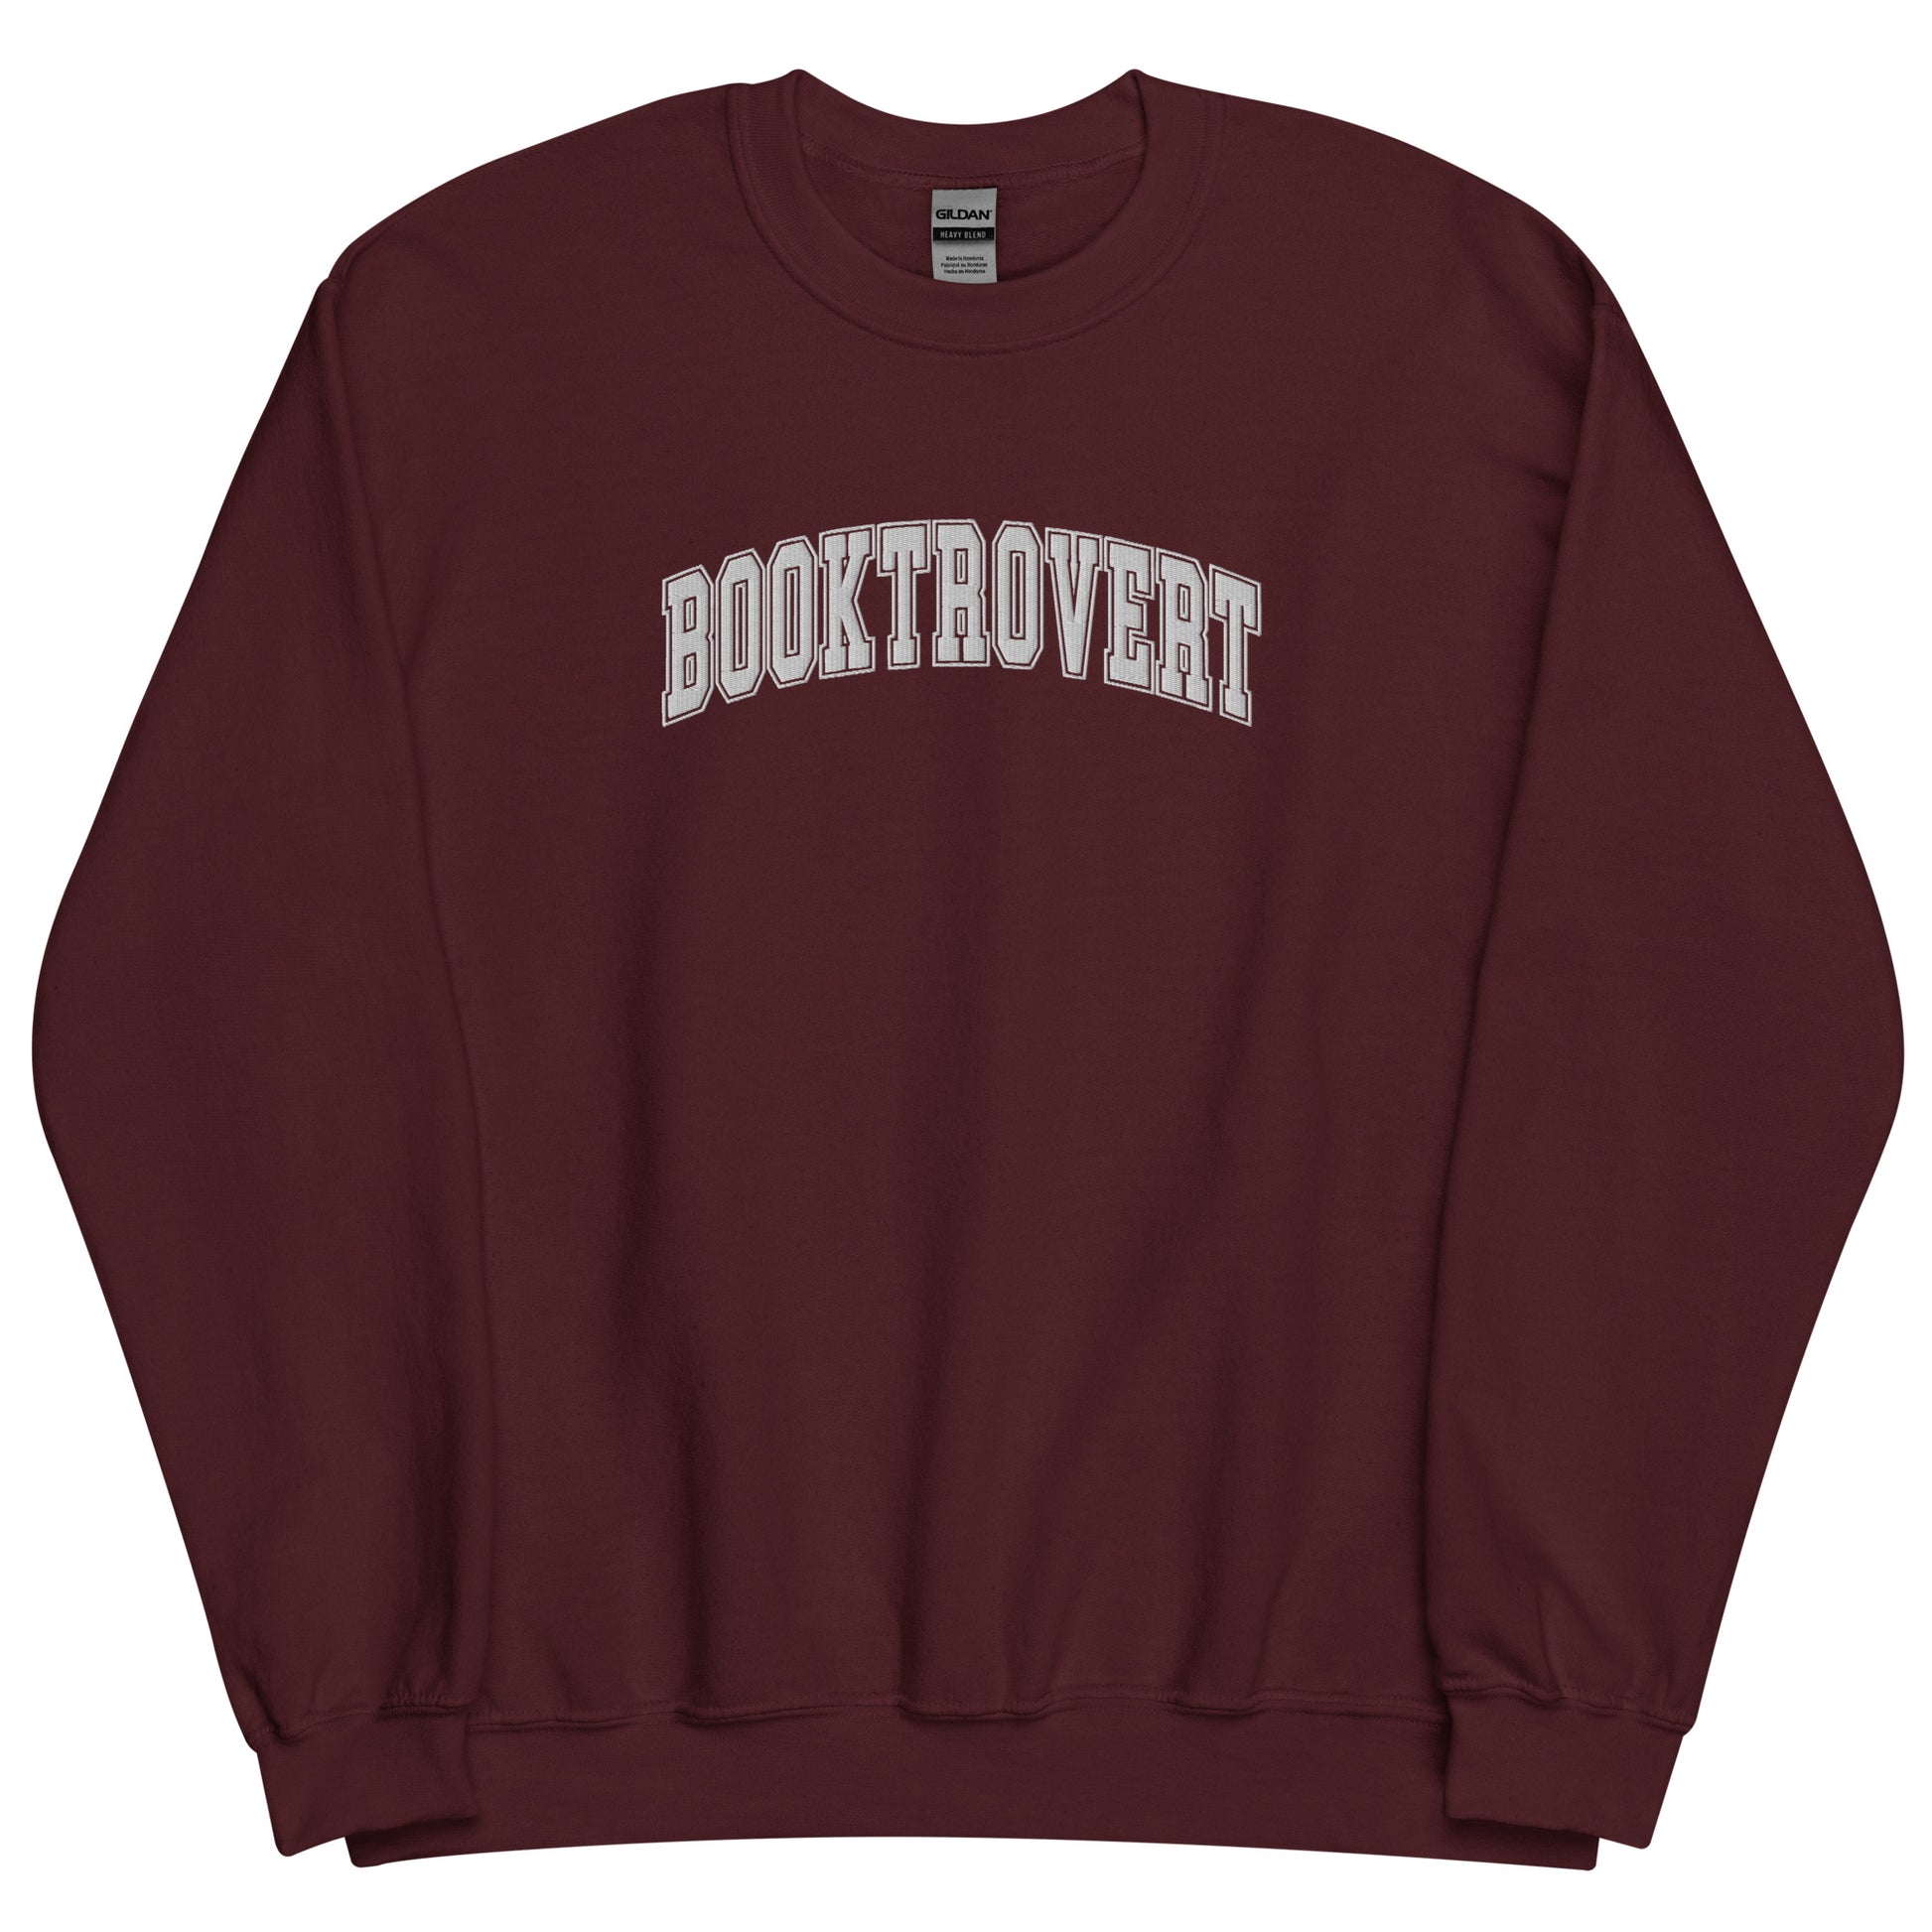 Introducing our "Booktrovert" Embroidered Sweatshirt – the epitome of cozy sophistication for introverted book lovers who find solace in the world of words.